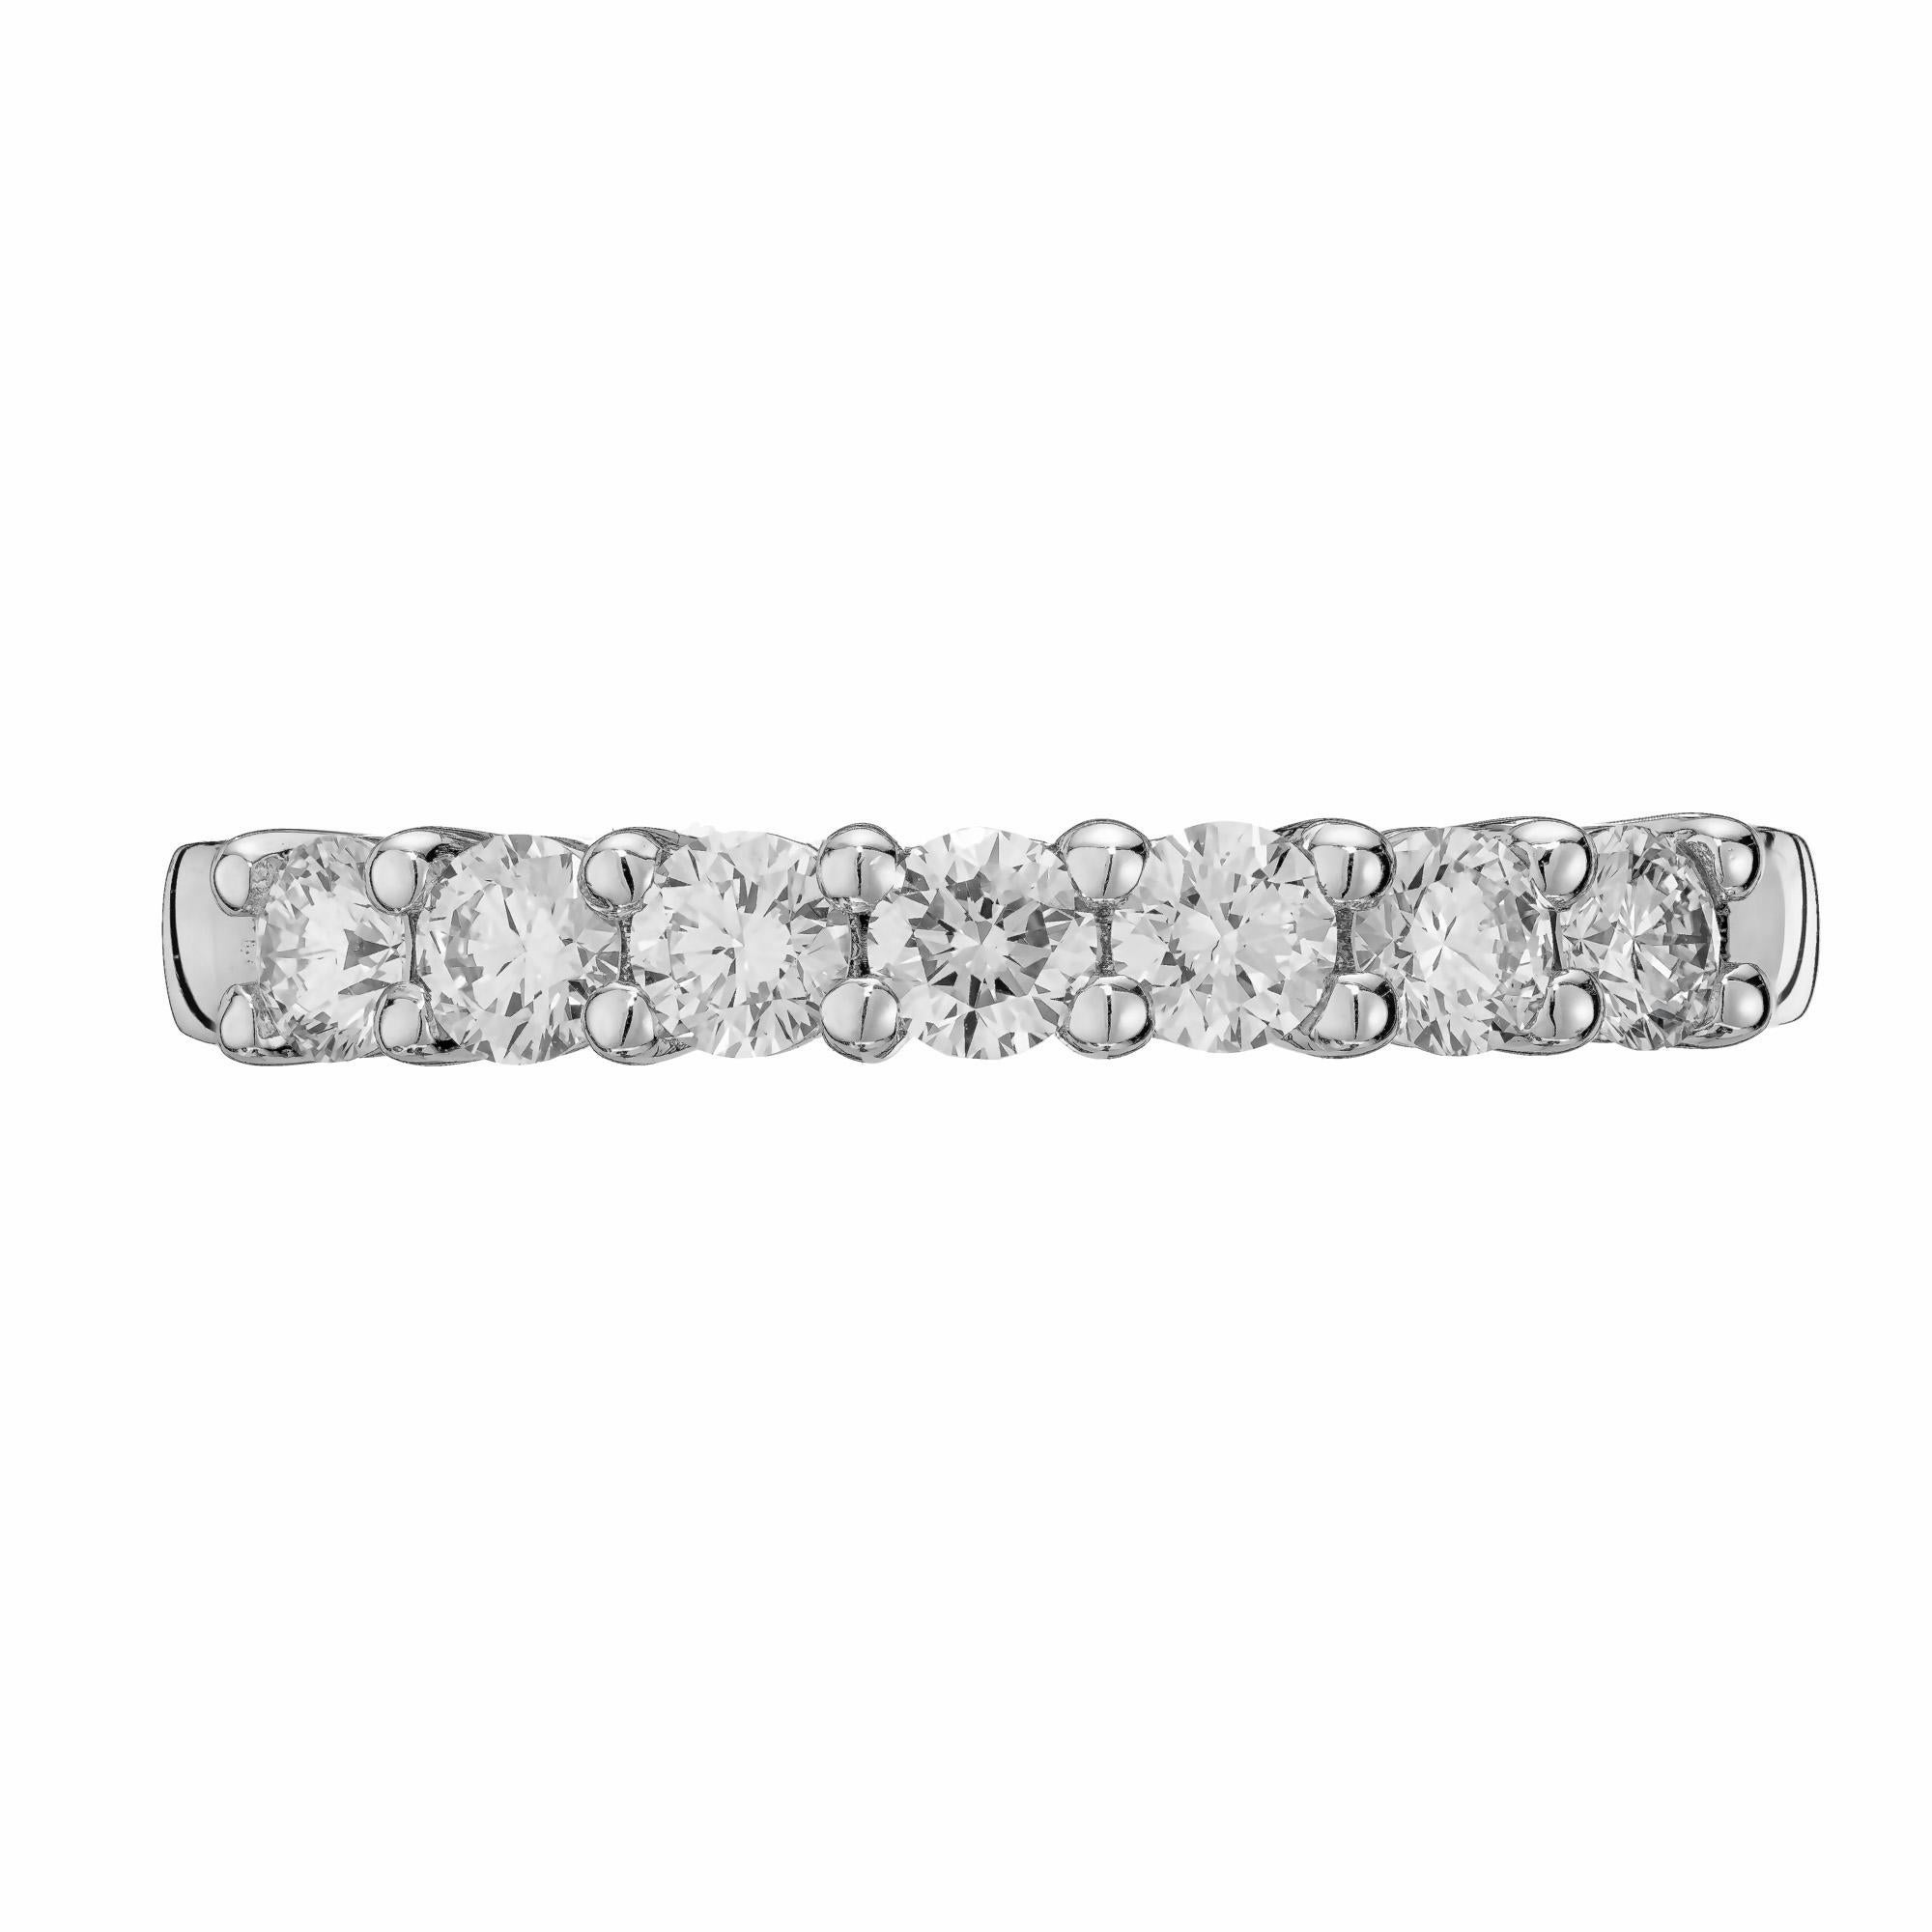 Diamond wedding band ring. Seven round brilliant cut diamonds, set in a platinum common prong setting. Designed and crafted in the Peter Suchy workshop

7 round brilliant cut diamonds, G VS approx. .42cts
Size 5 and sizable 
Platinum 
Stamped: